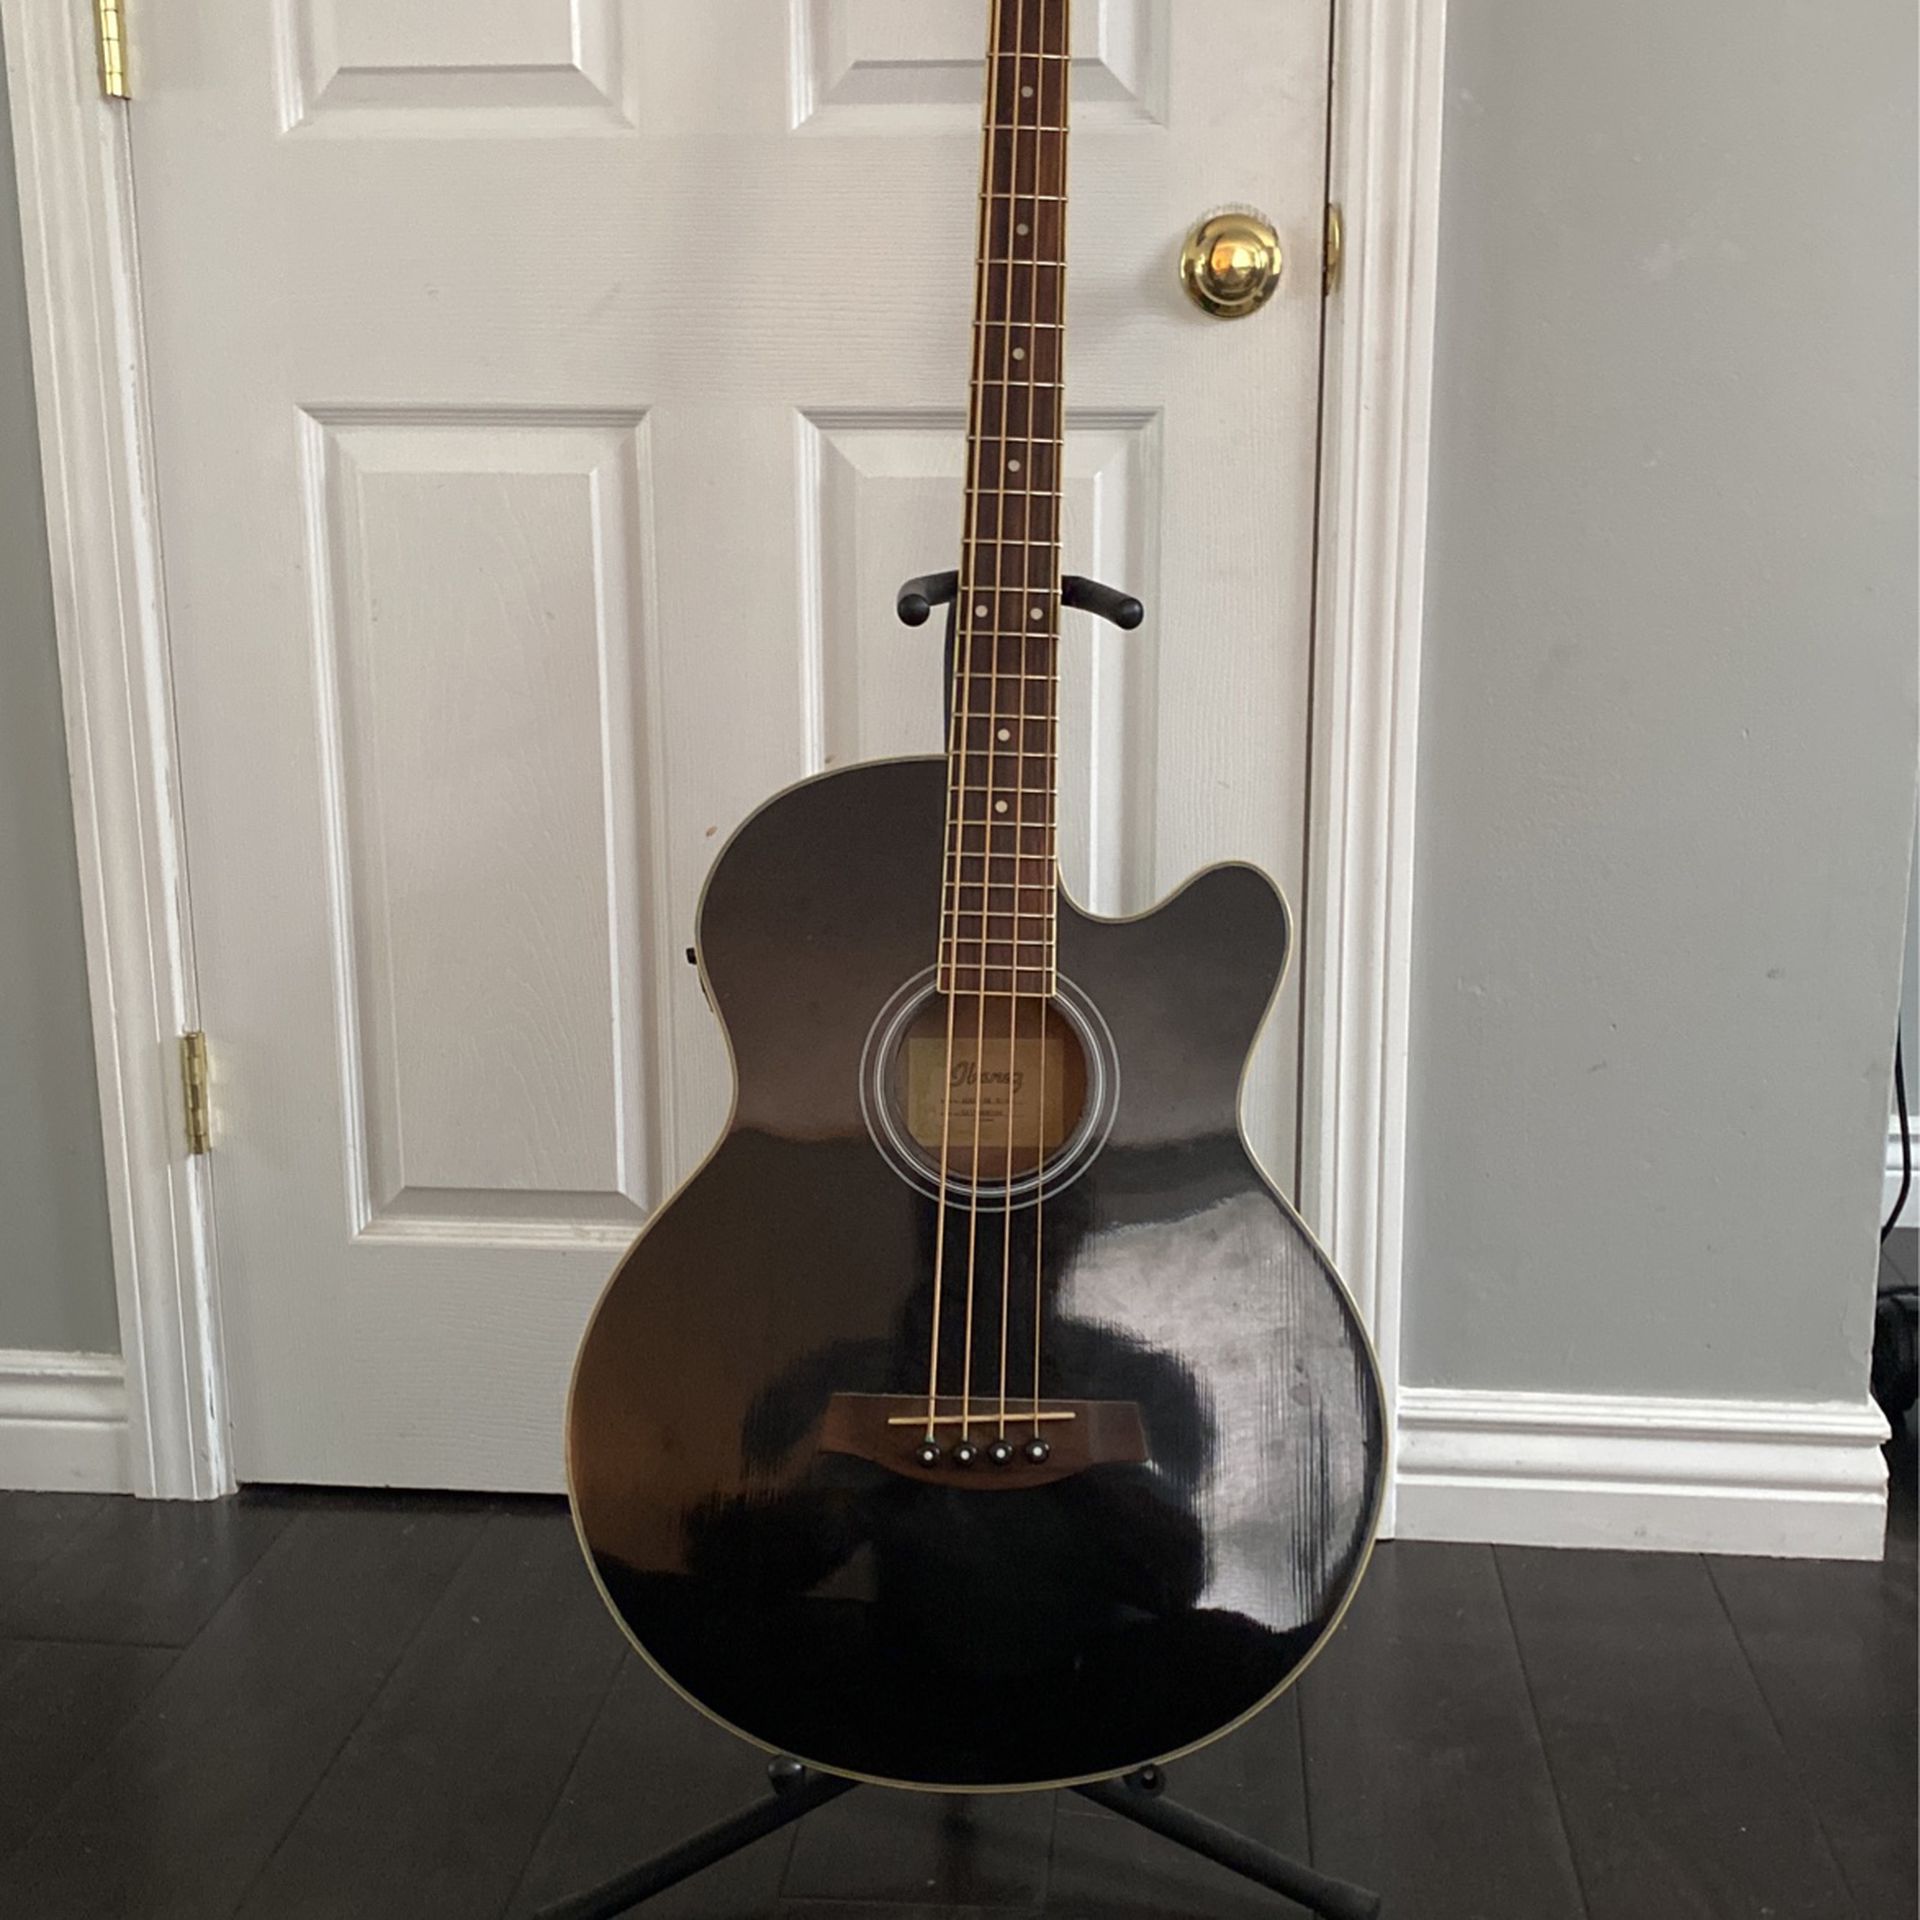 Ibanez Acoustic Bass Guitar (Plug In)